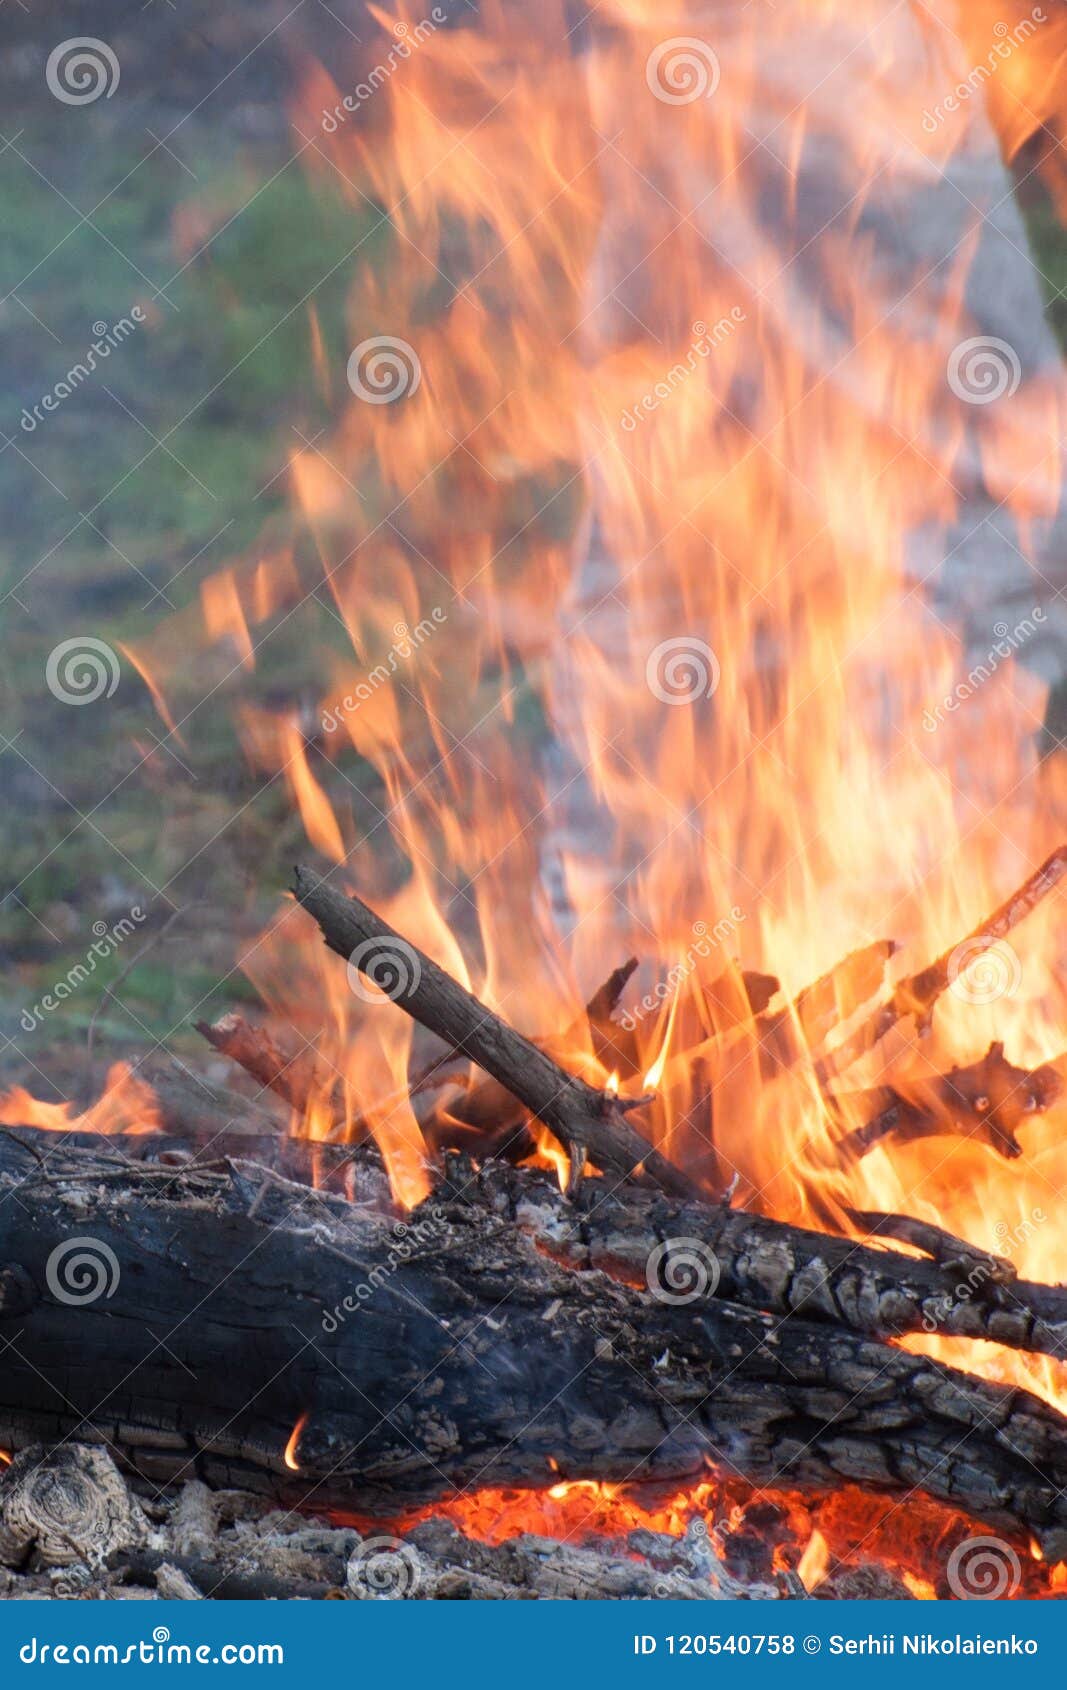 Bonfire. Wooden Logs are Burning. a High Flame Stock Photo - Image of ...